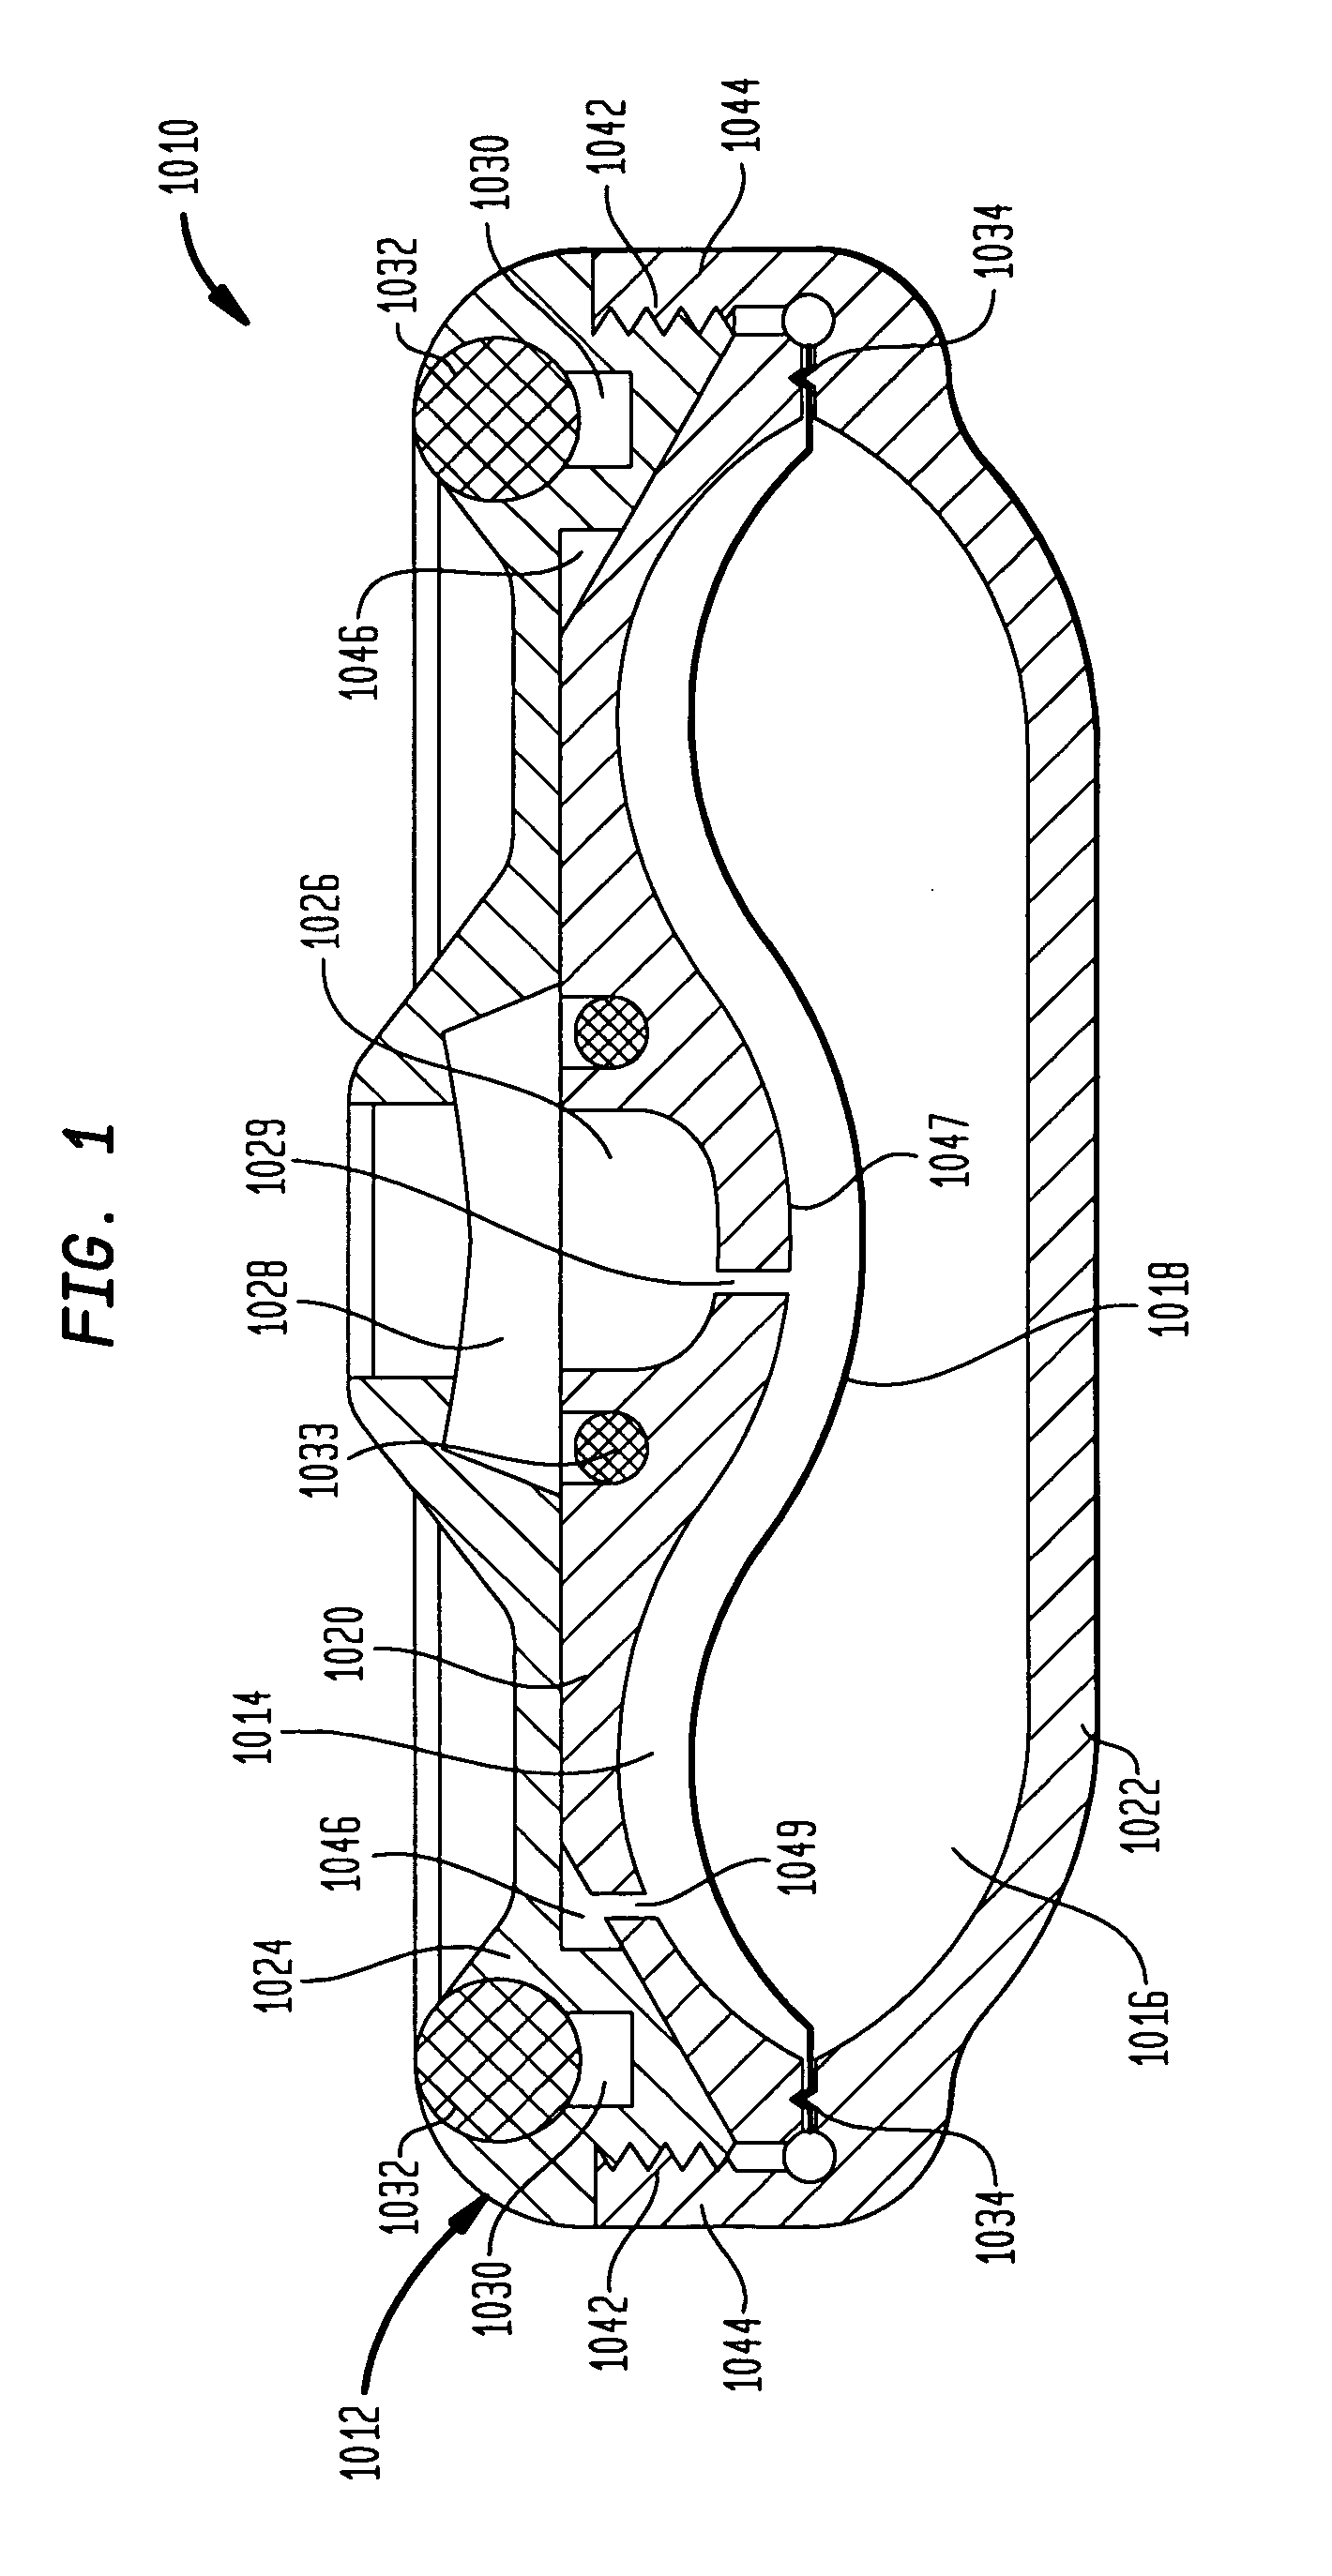 Reduced size implantable pump